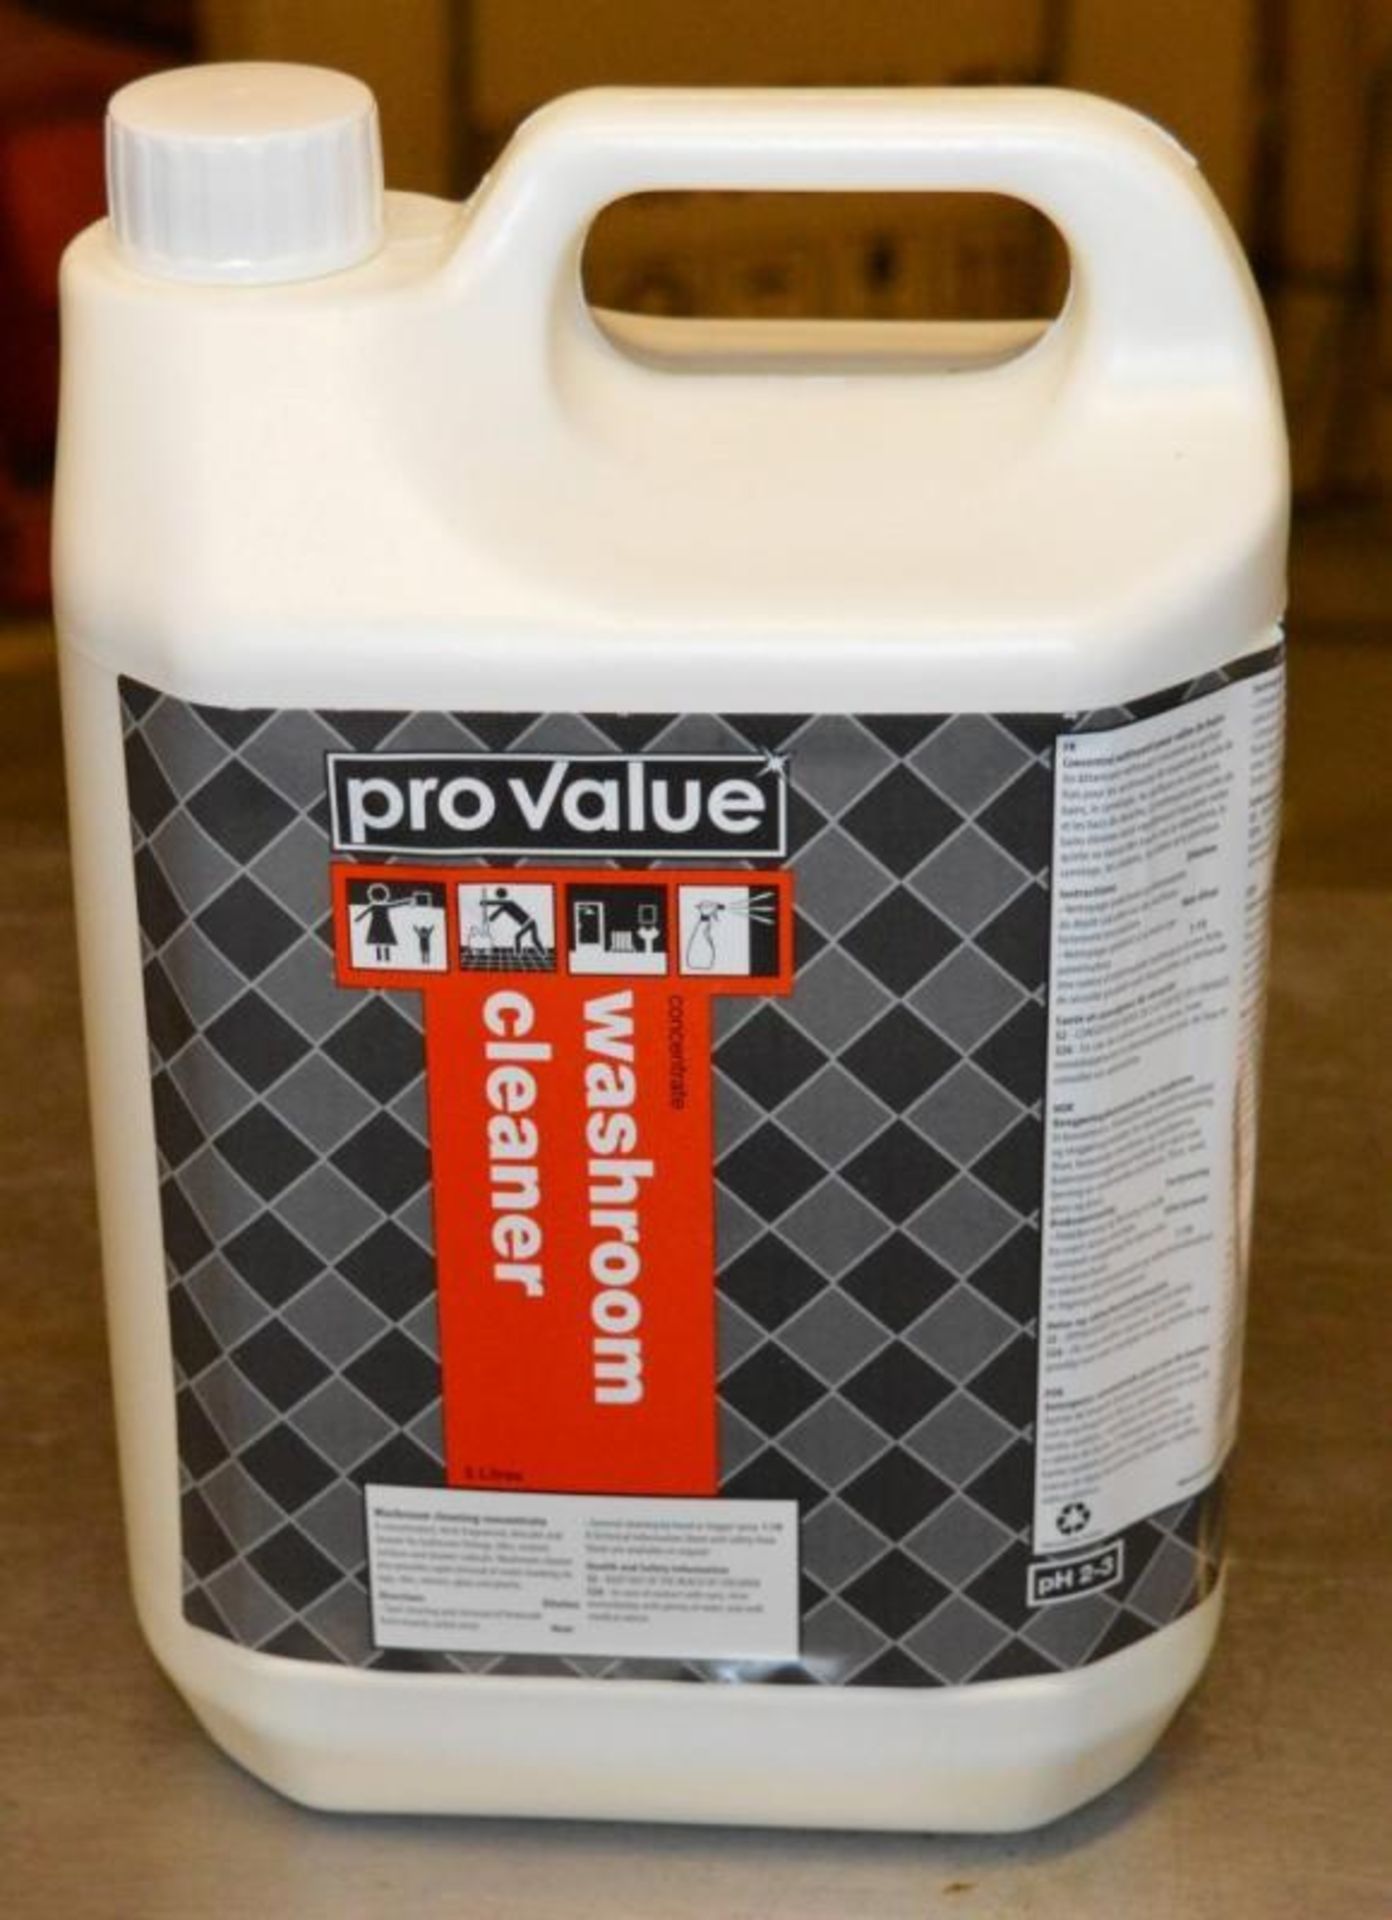 50 x Pro Value Concentrated Washroom Cleaner - Fresh Fragranced Descaler And Cleaner With Rapid